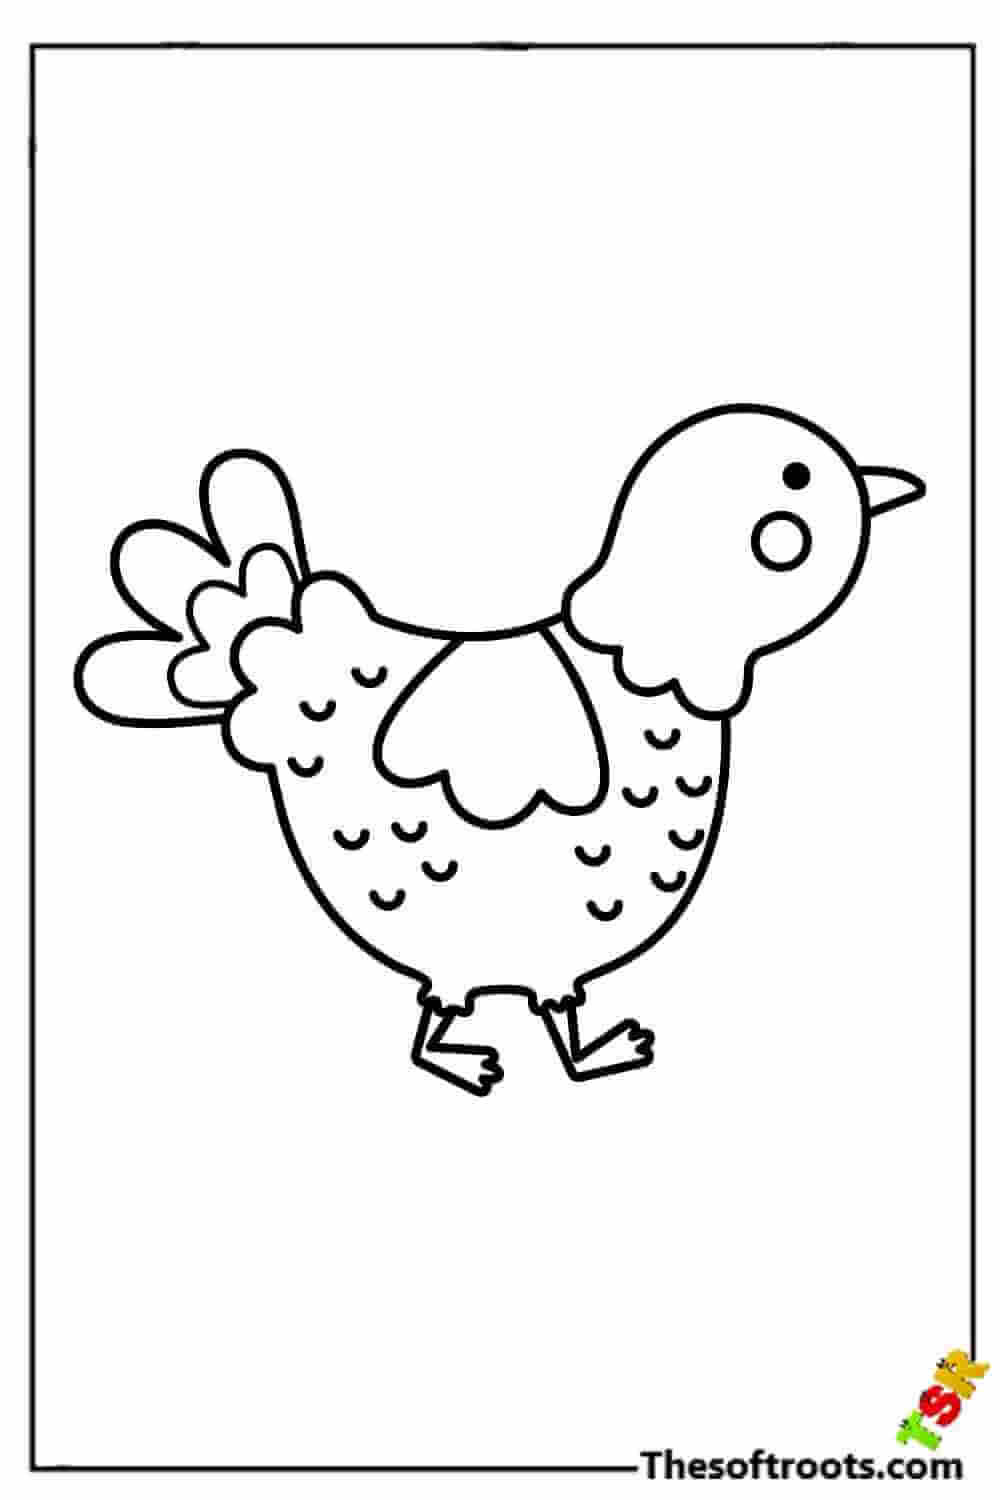 Cute baby turkey coloring pages